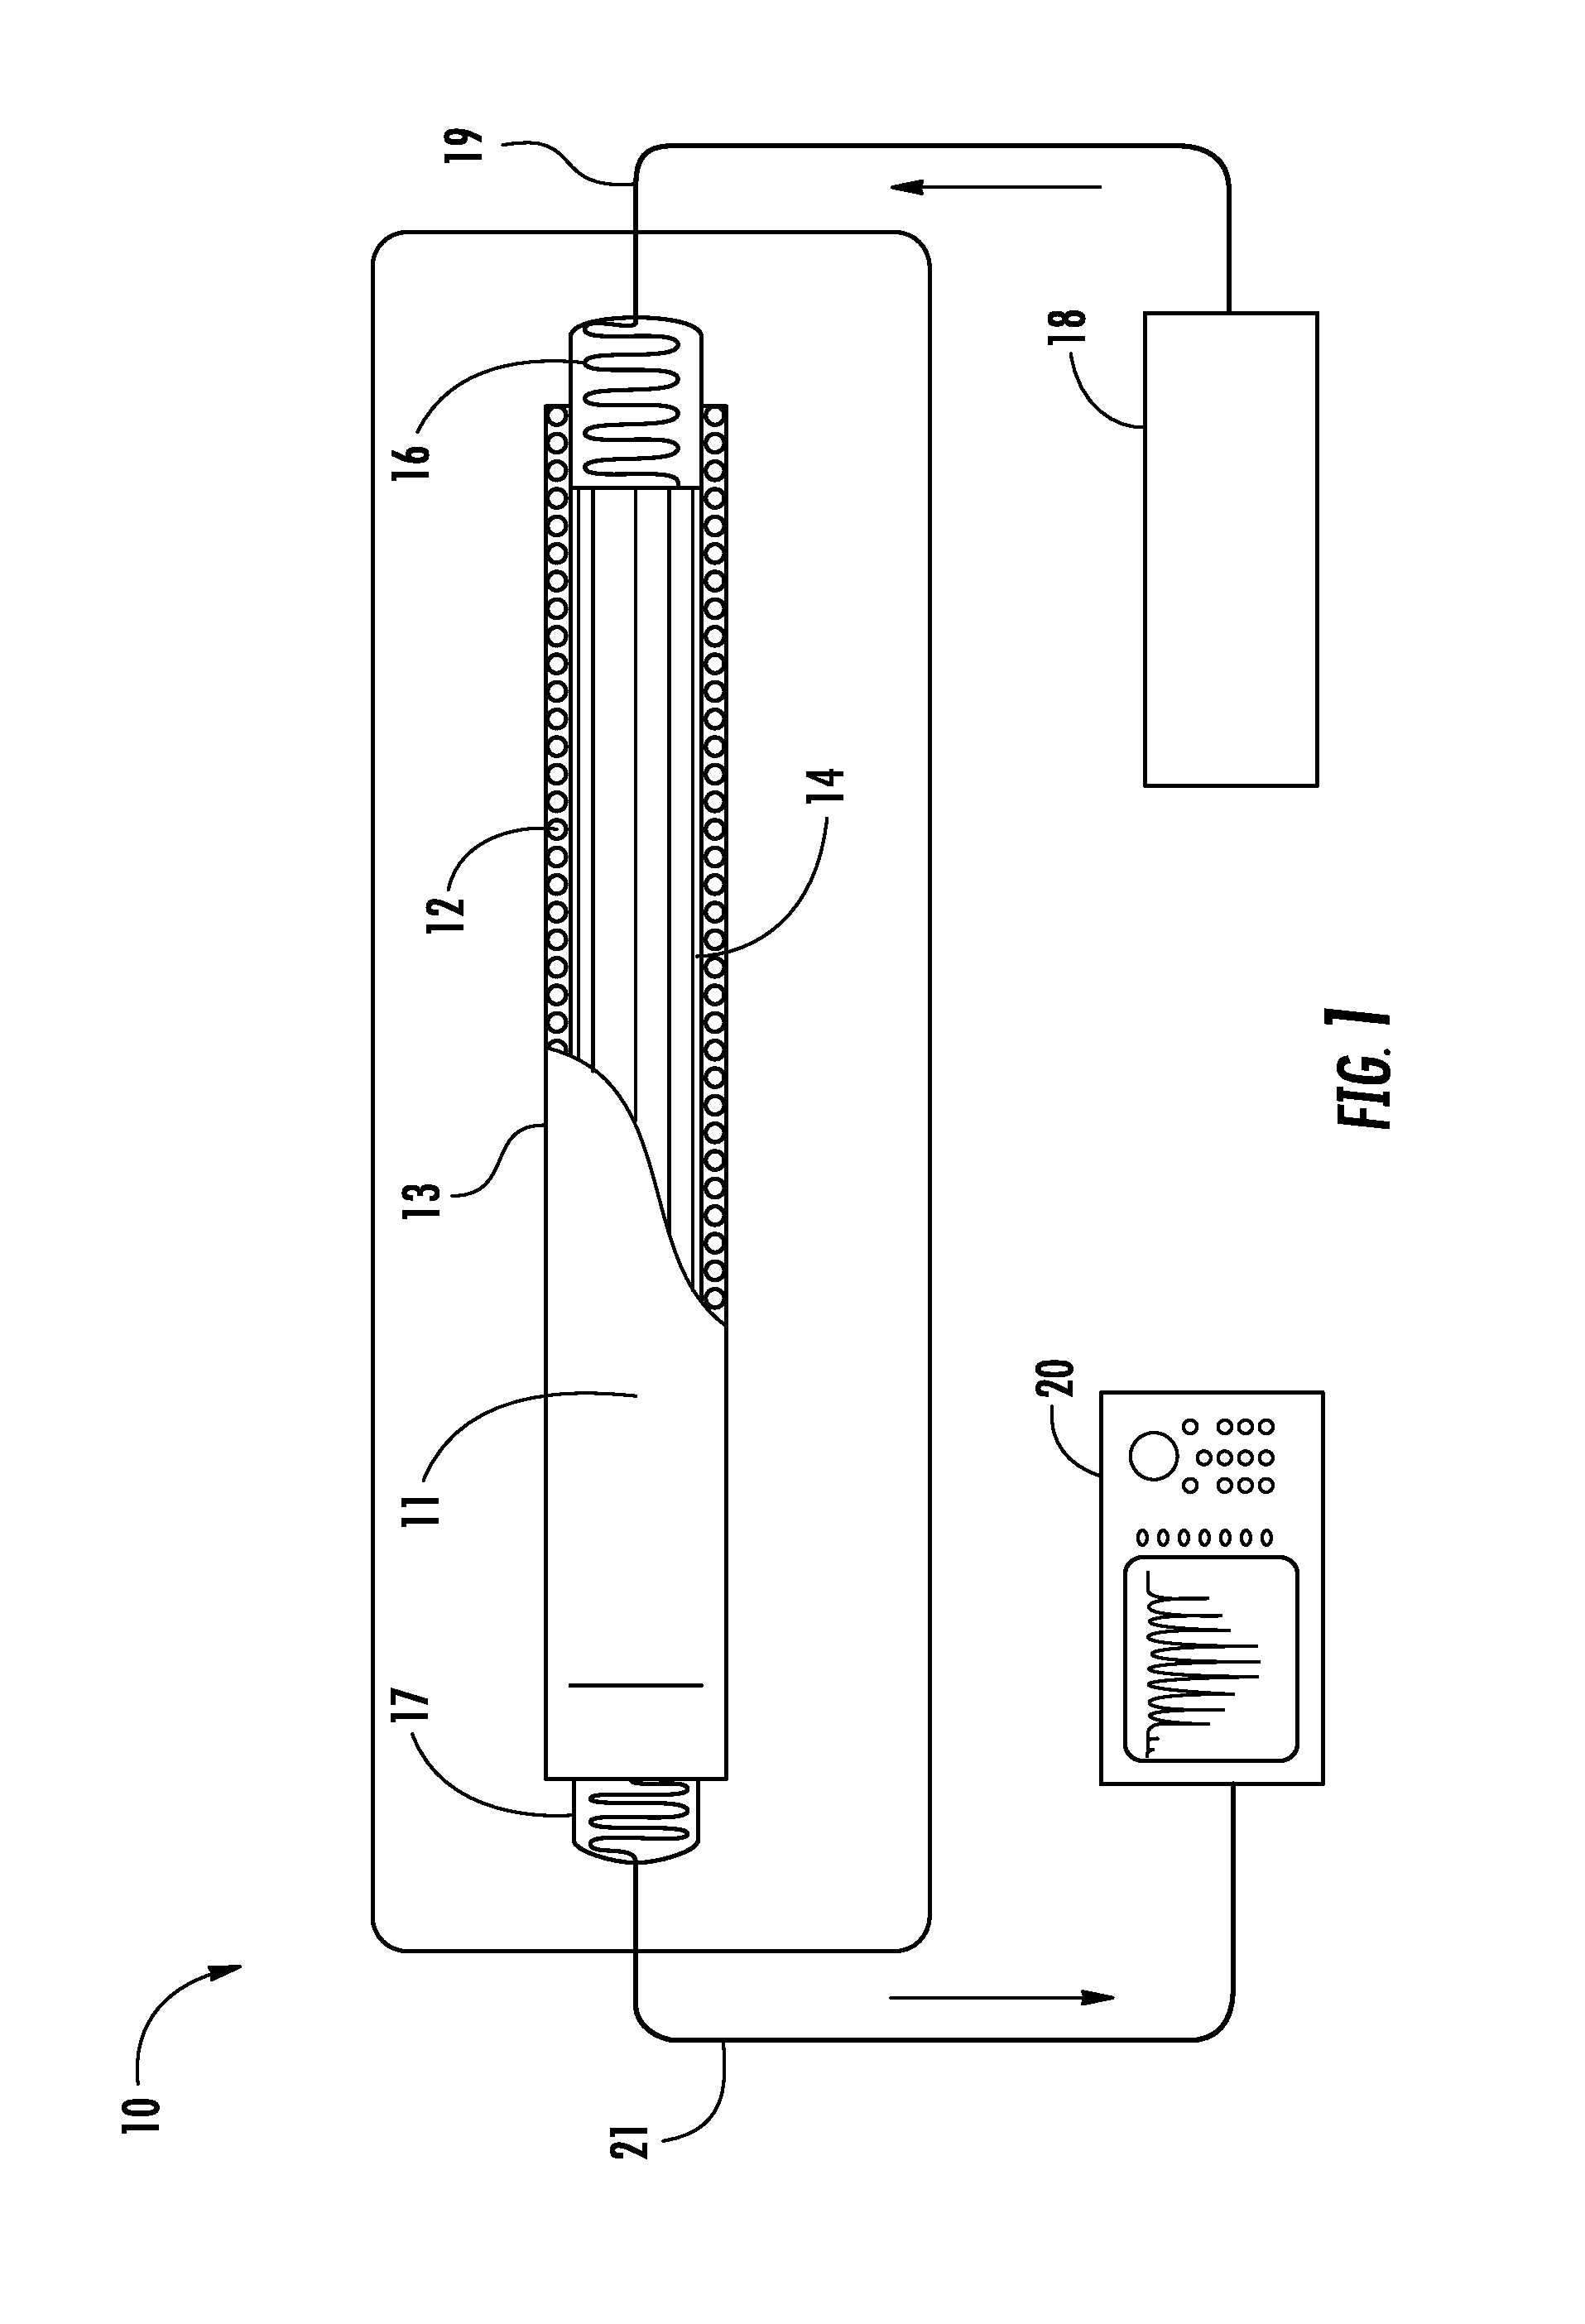 Apparatus and method for on-line, real-time analysis of chemical gases dissolved in transformer oil